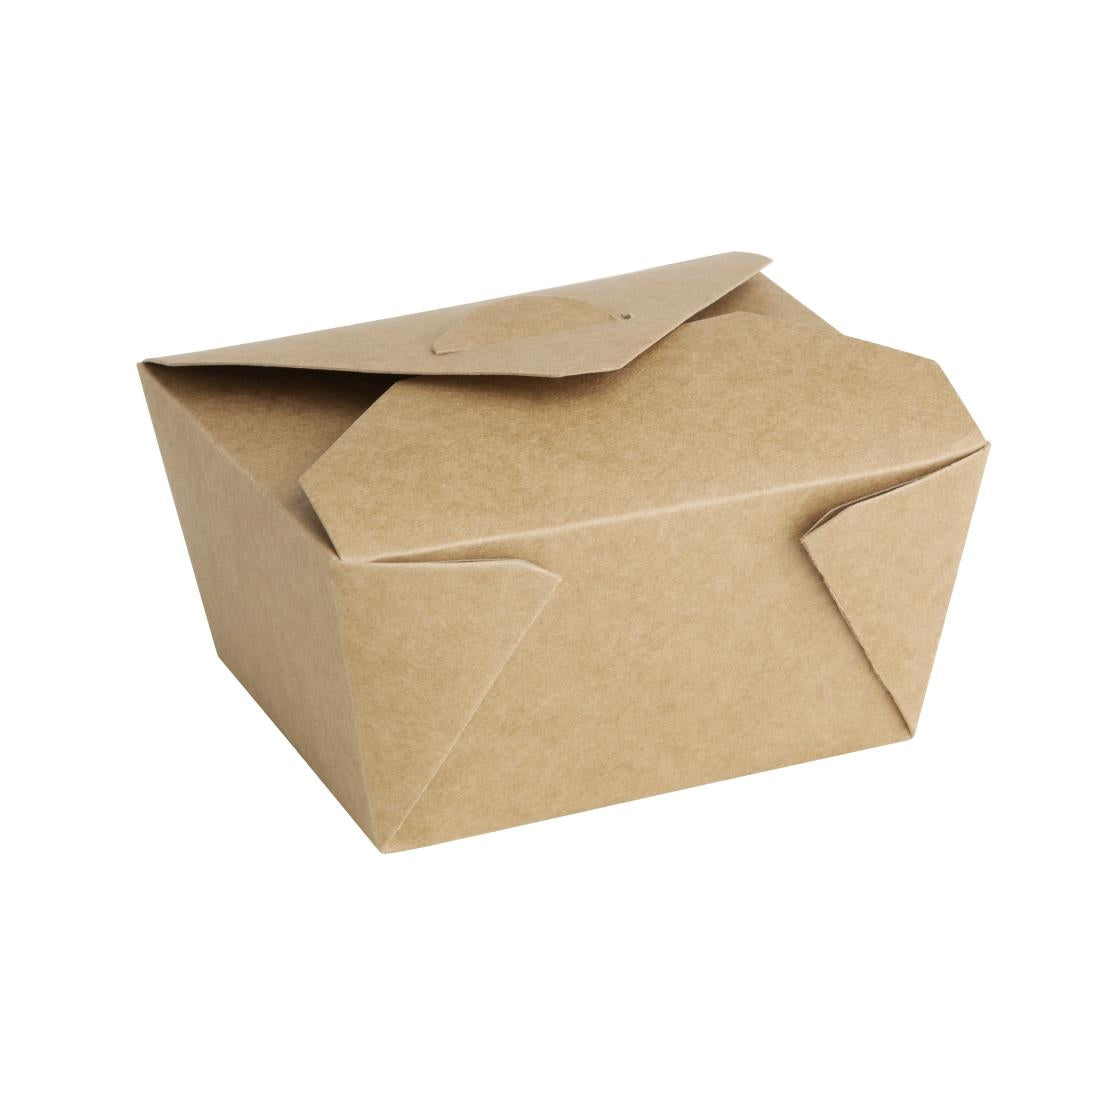 FB673 Fiesta Compostable Paperboard Food Cartons 600ml / 21oz (Pack of 400) JD Catering Equipment Solutions Ltd